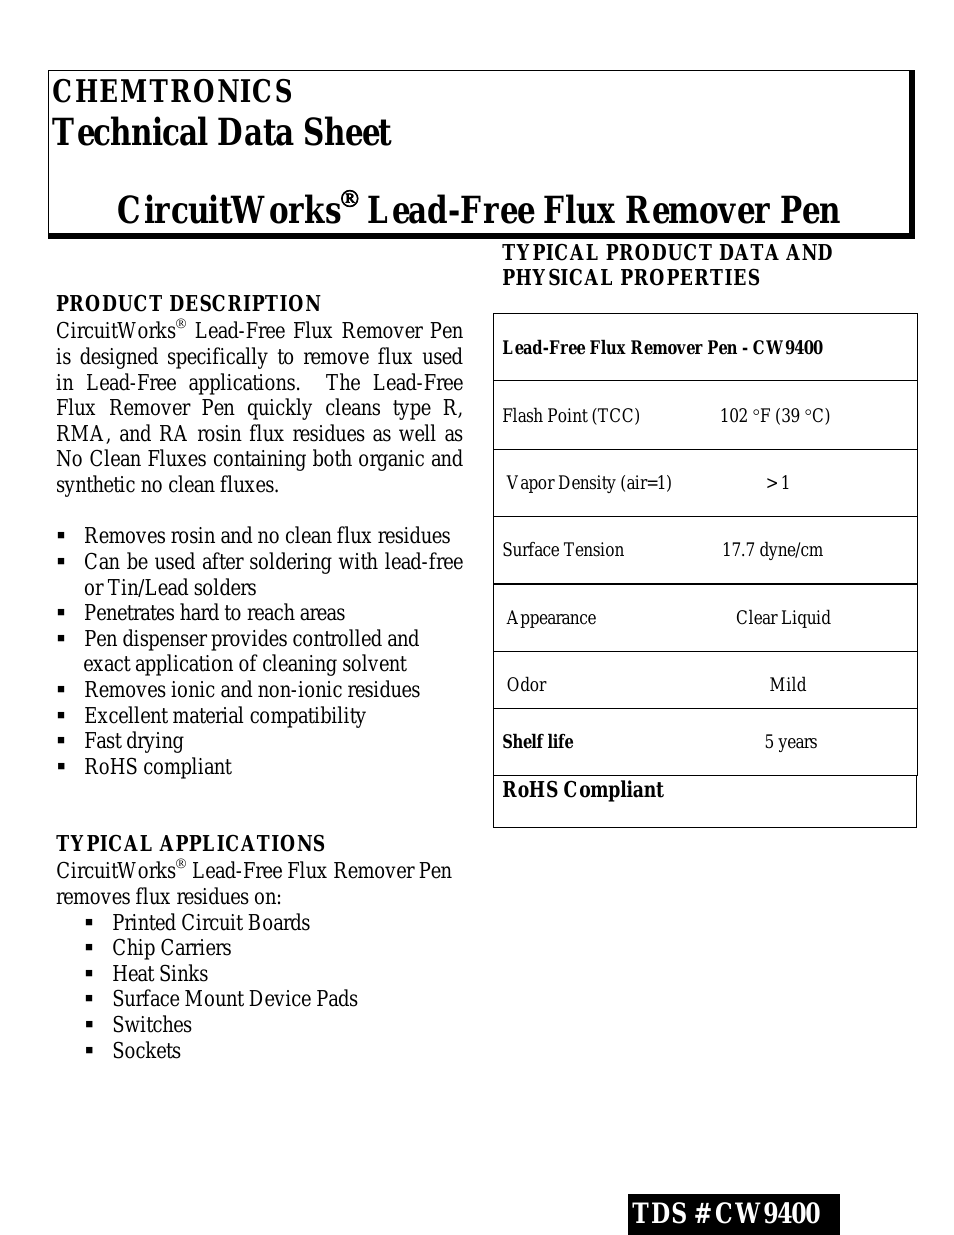 CircuitWorks® Lead-Free Flux Remover Pen CW9400